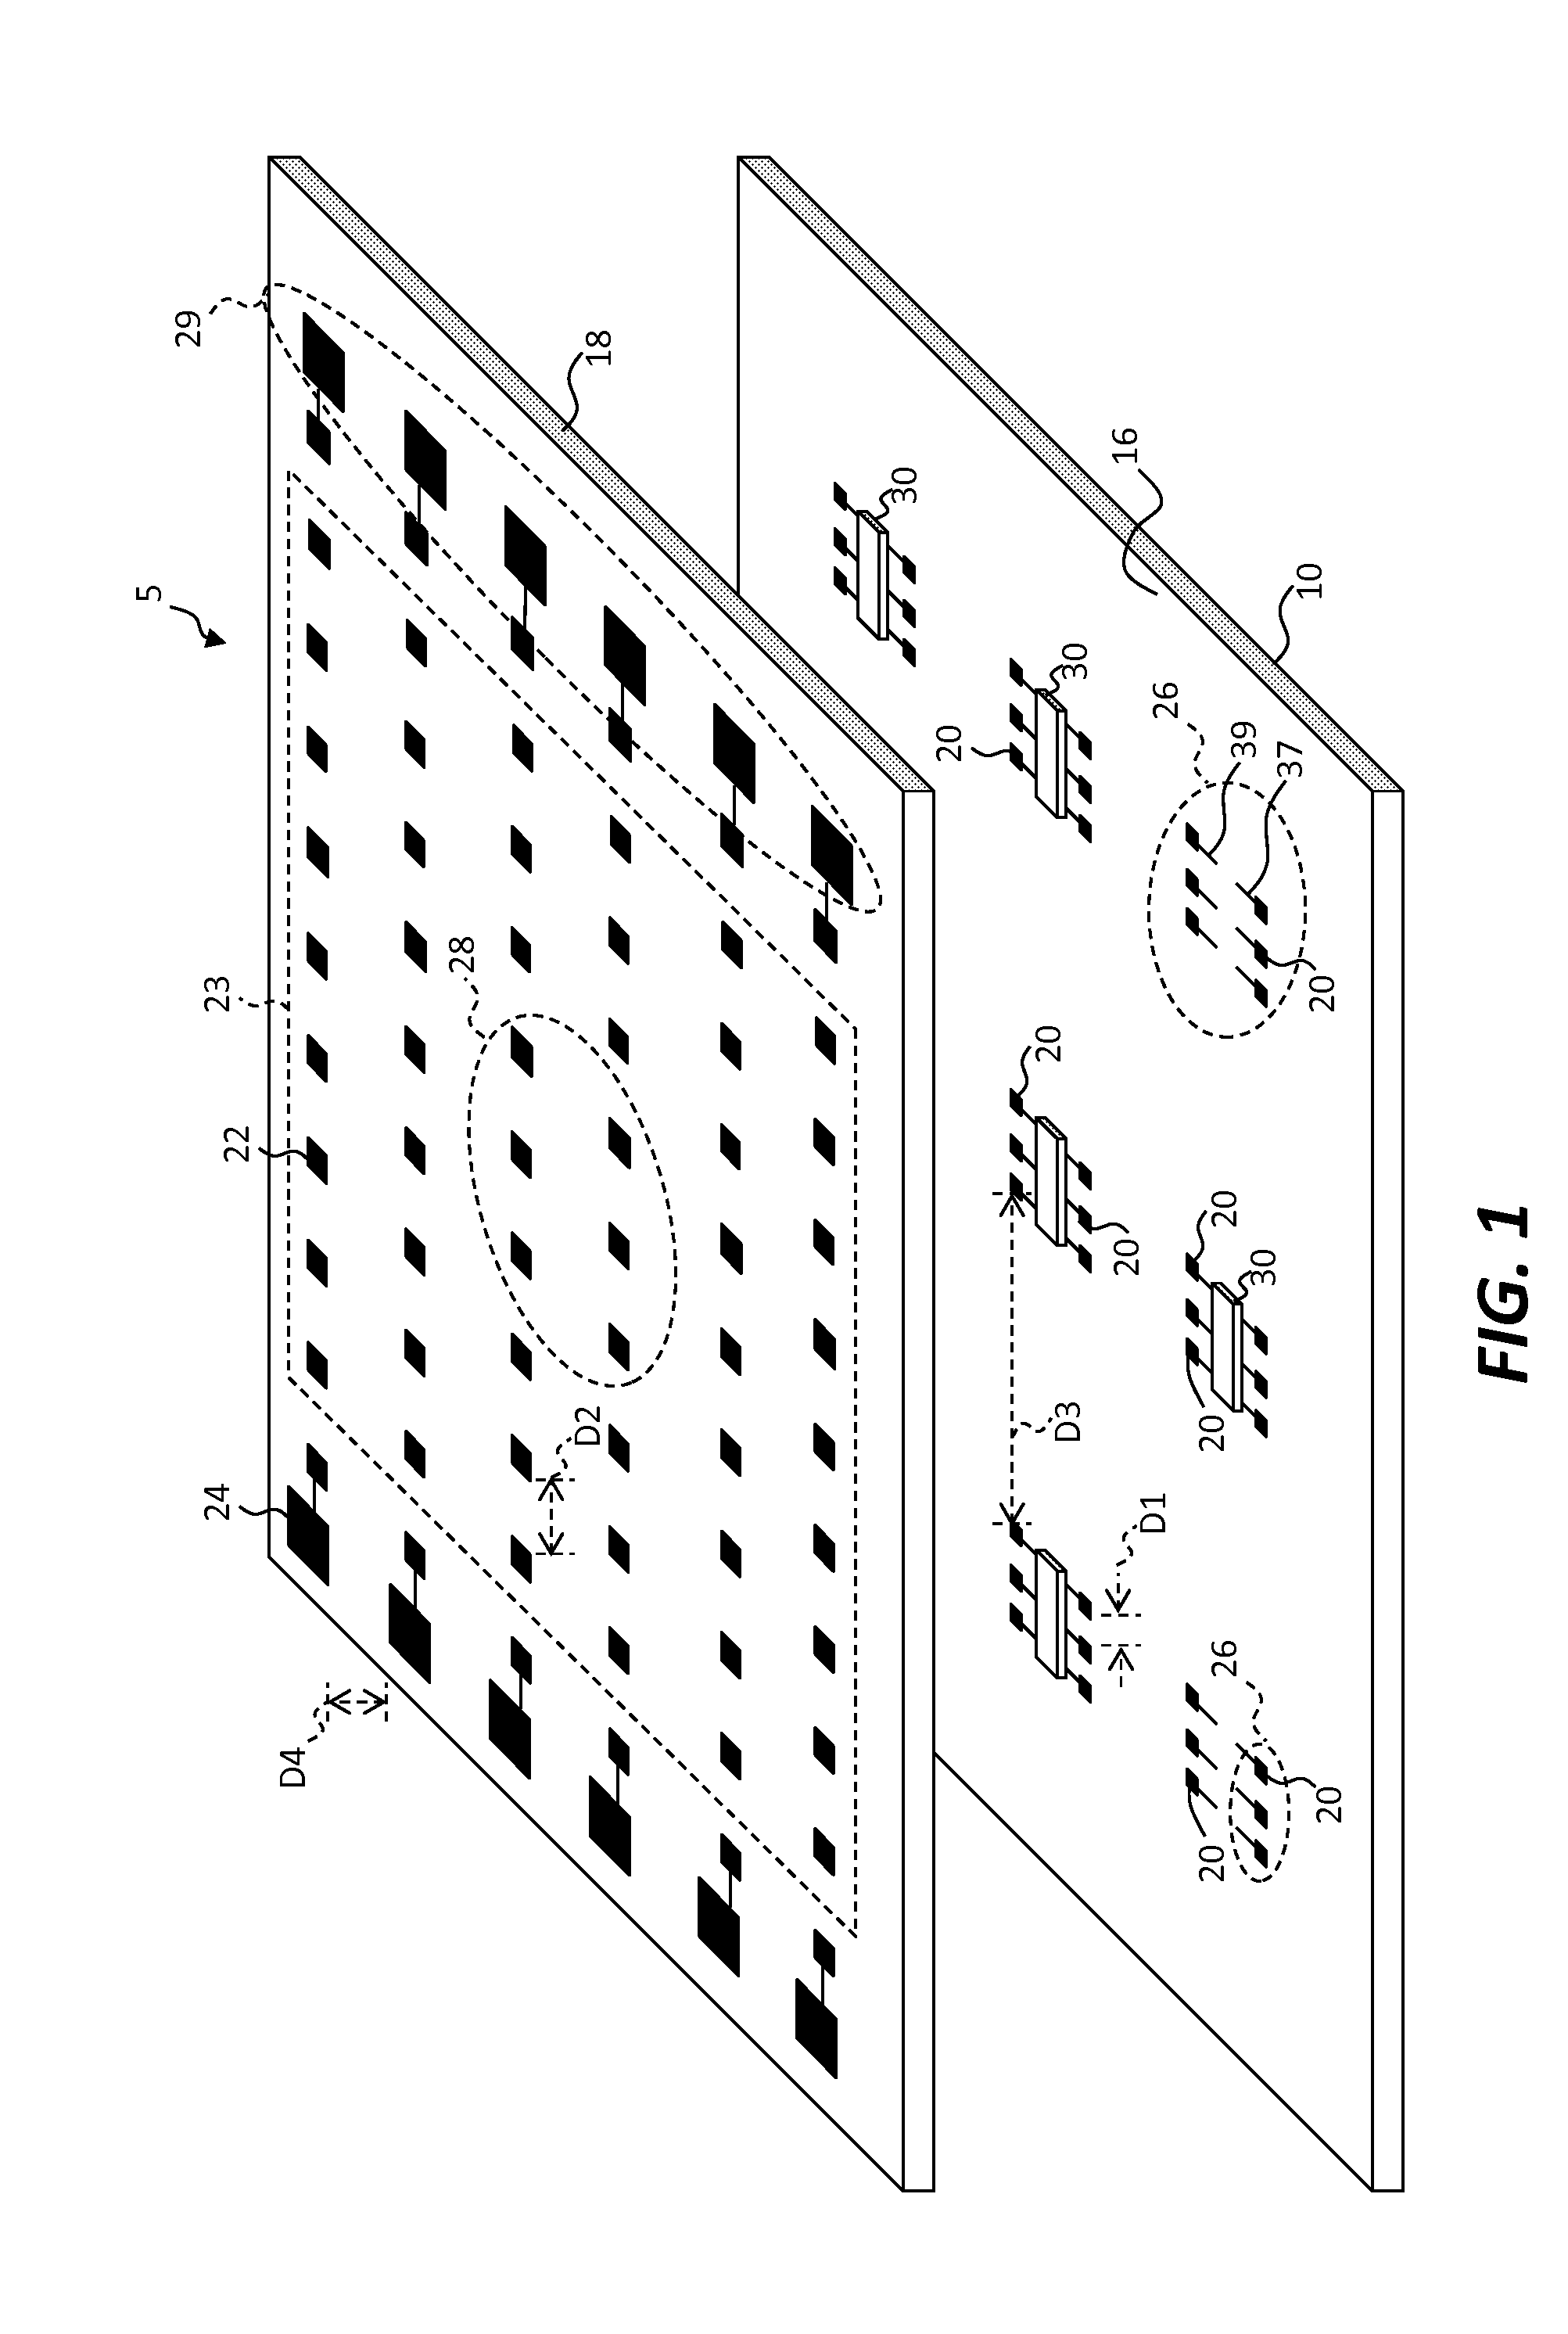 Redistribution layer for substrate contacts